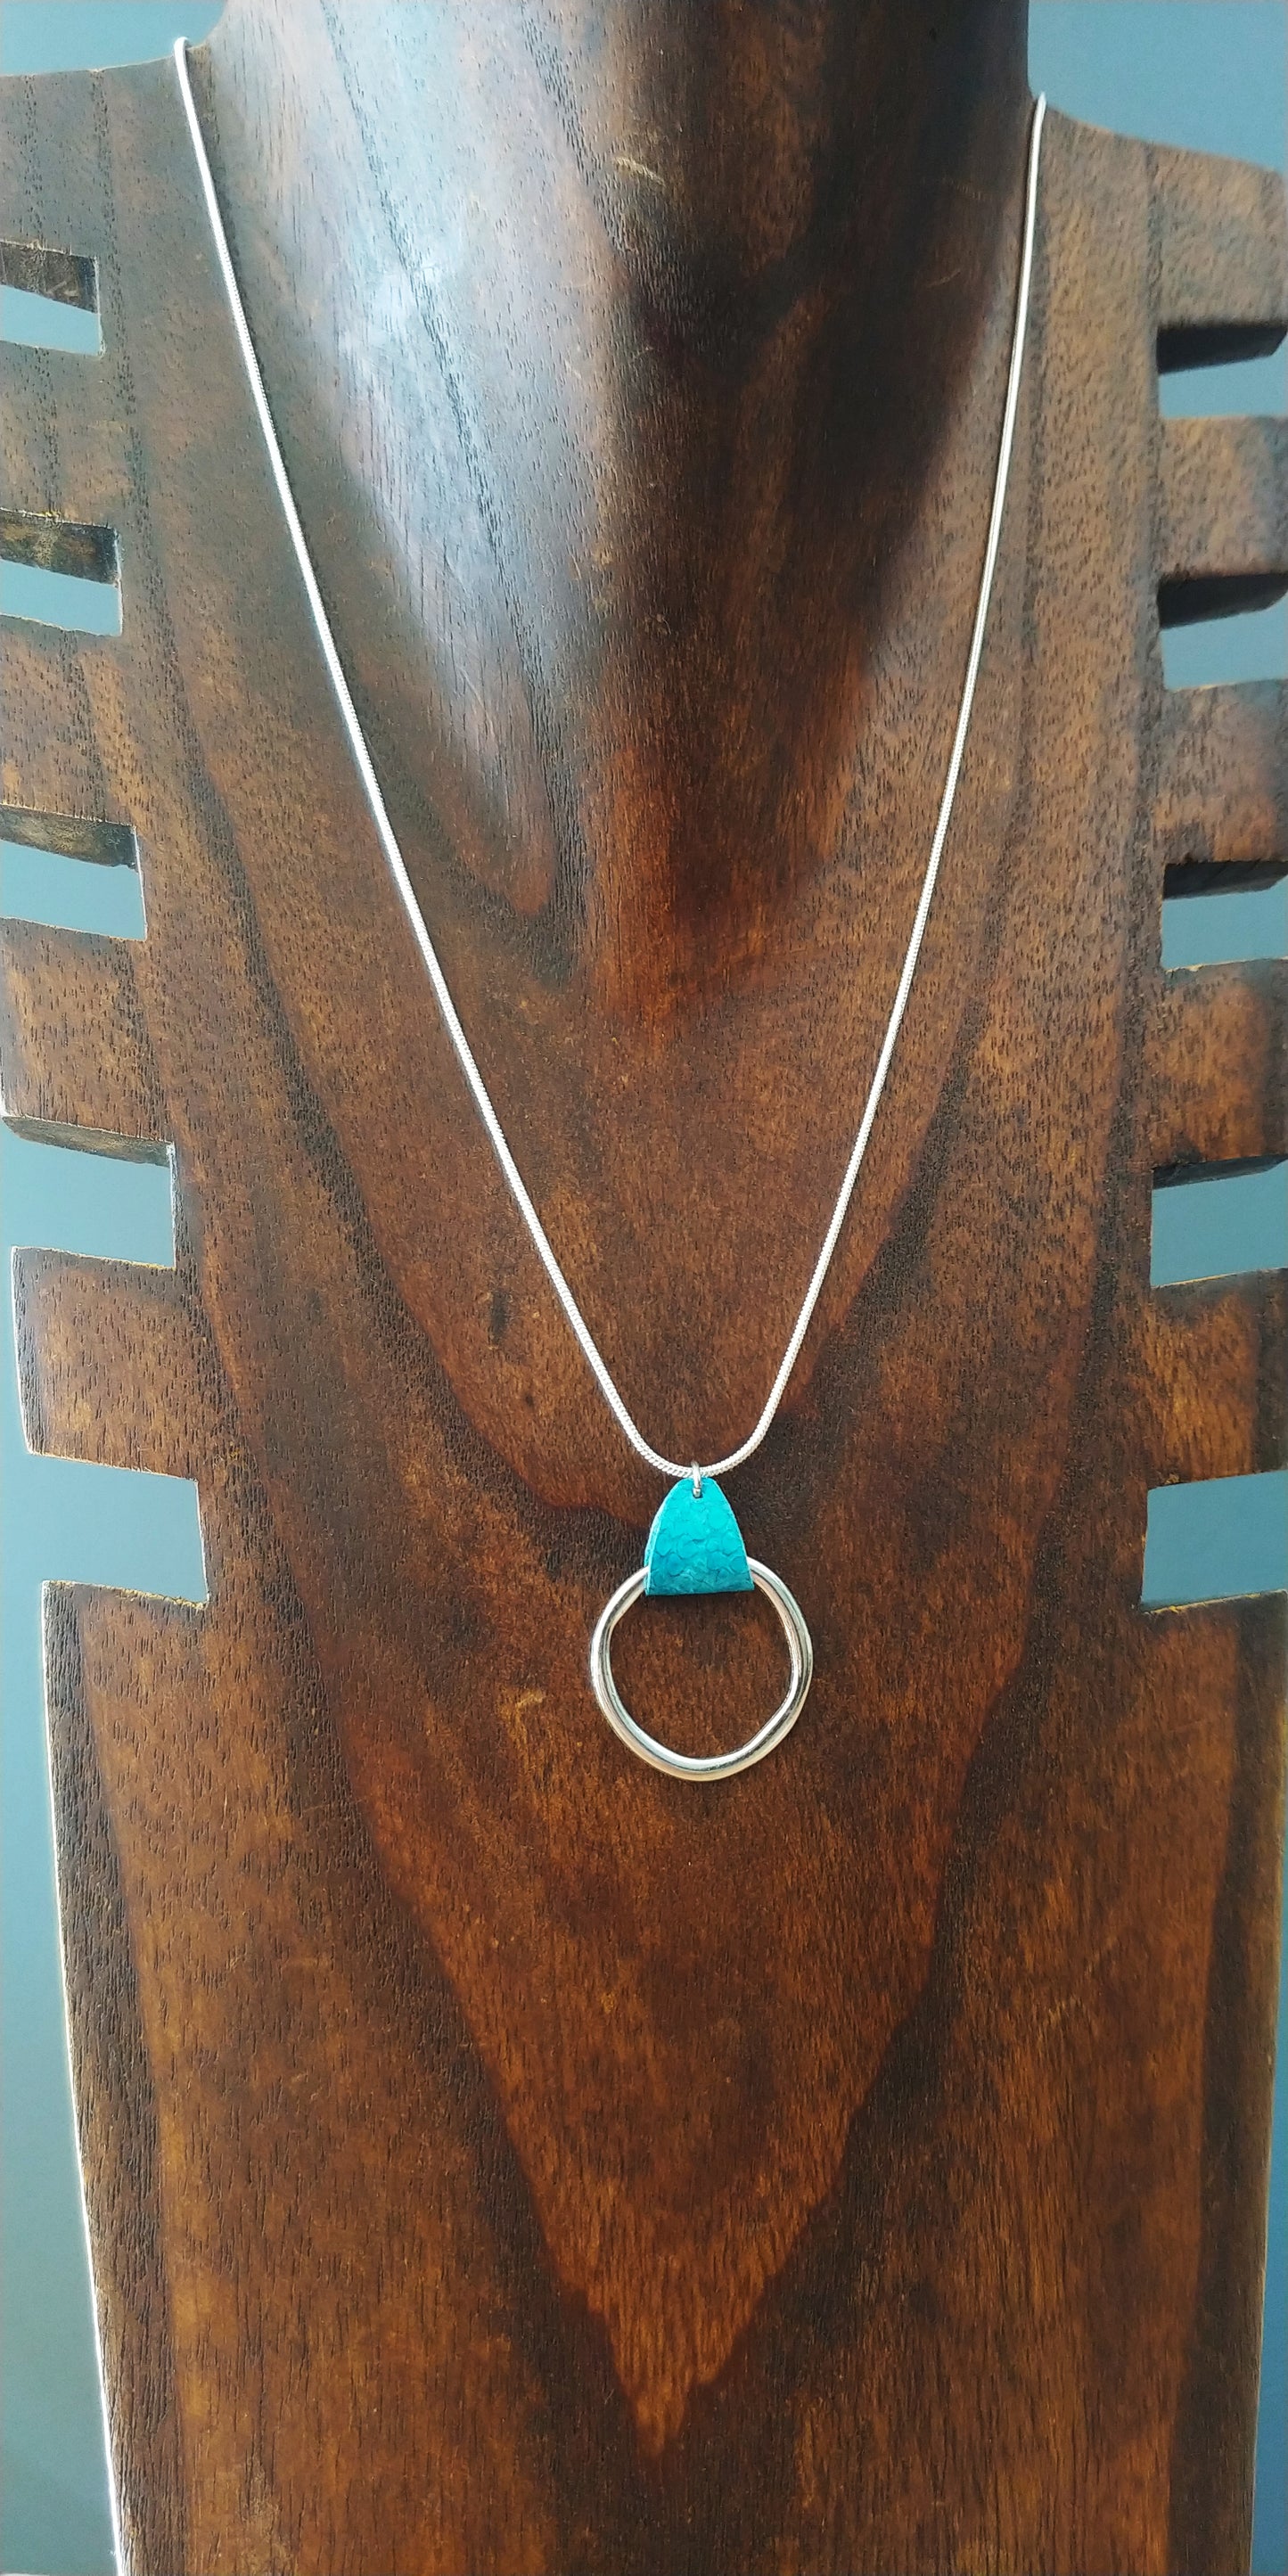 Blue Salmon Leather Silver Circle Necklace - Icelandic Fish Leather Jewelry - Handmade in Iceland